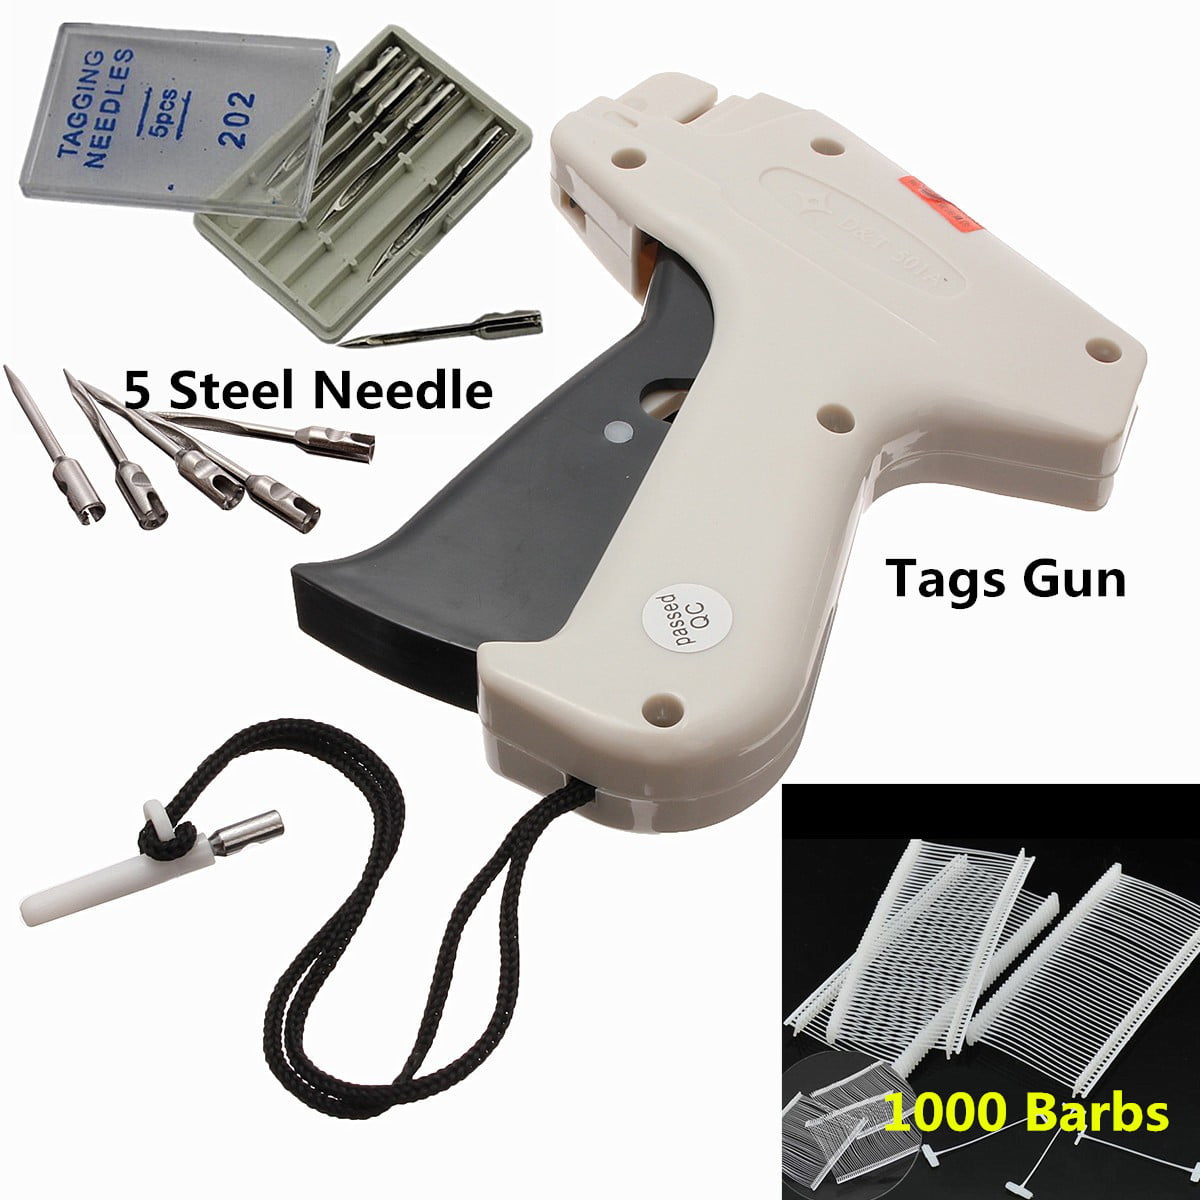 1000 White Price Tag Tagging Gun 1" REGULAR Barbs Fasteners TOP QUALITY 1 inch 